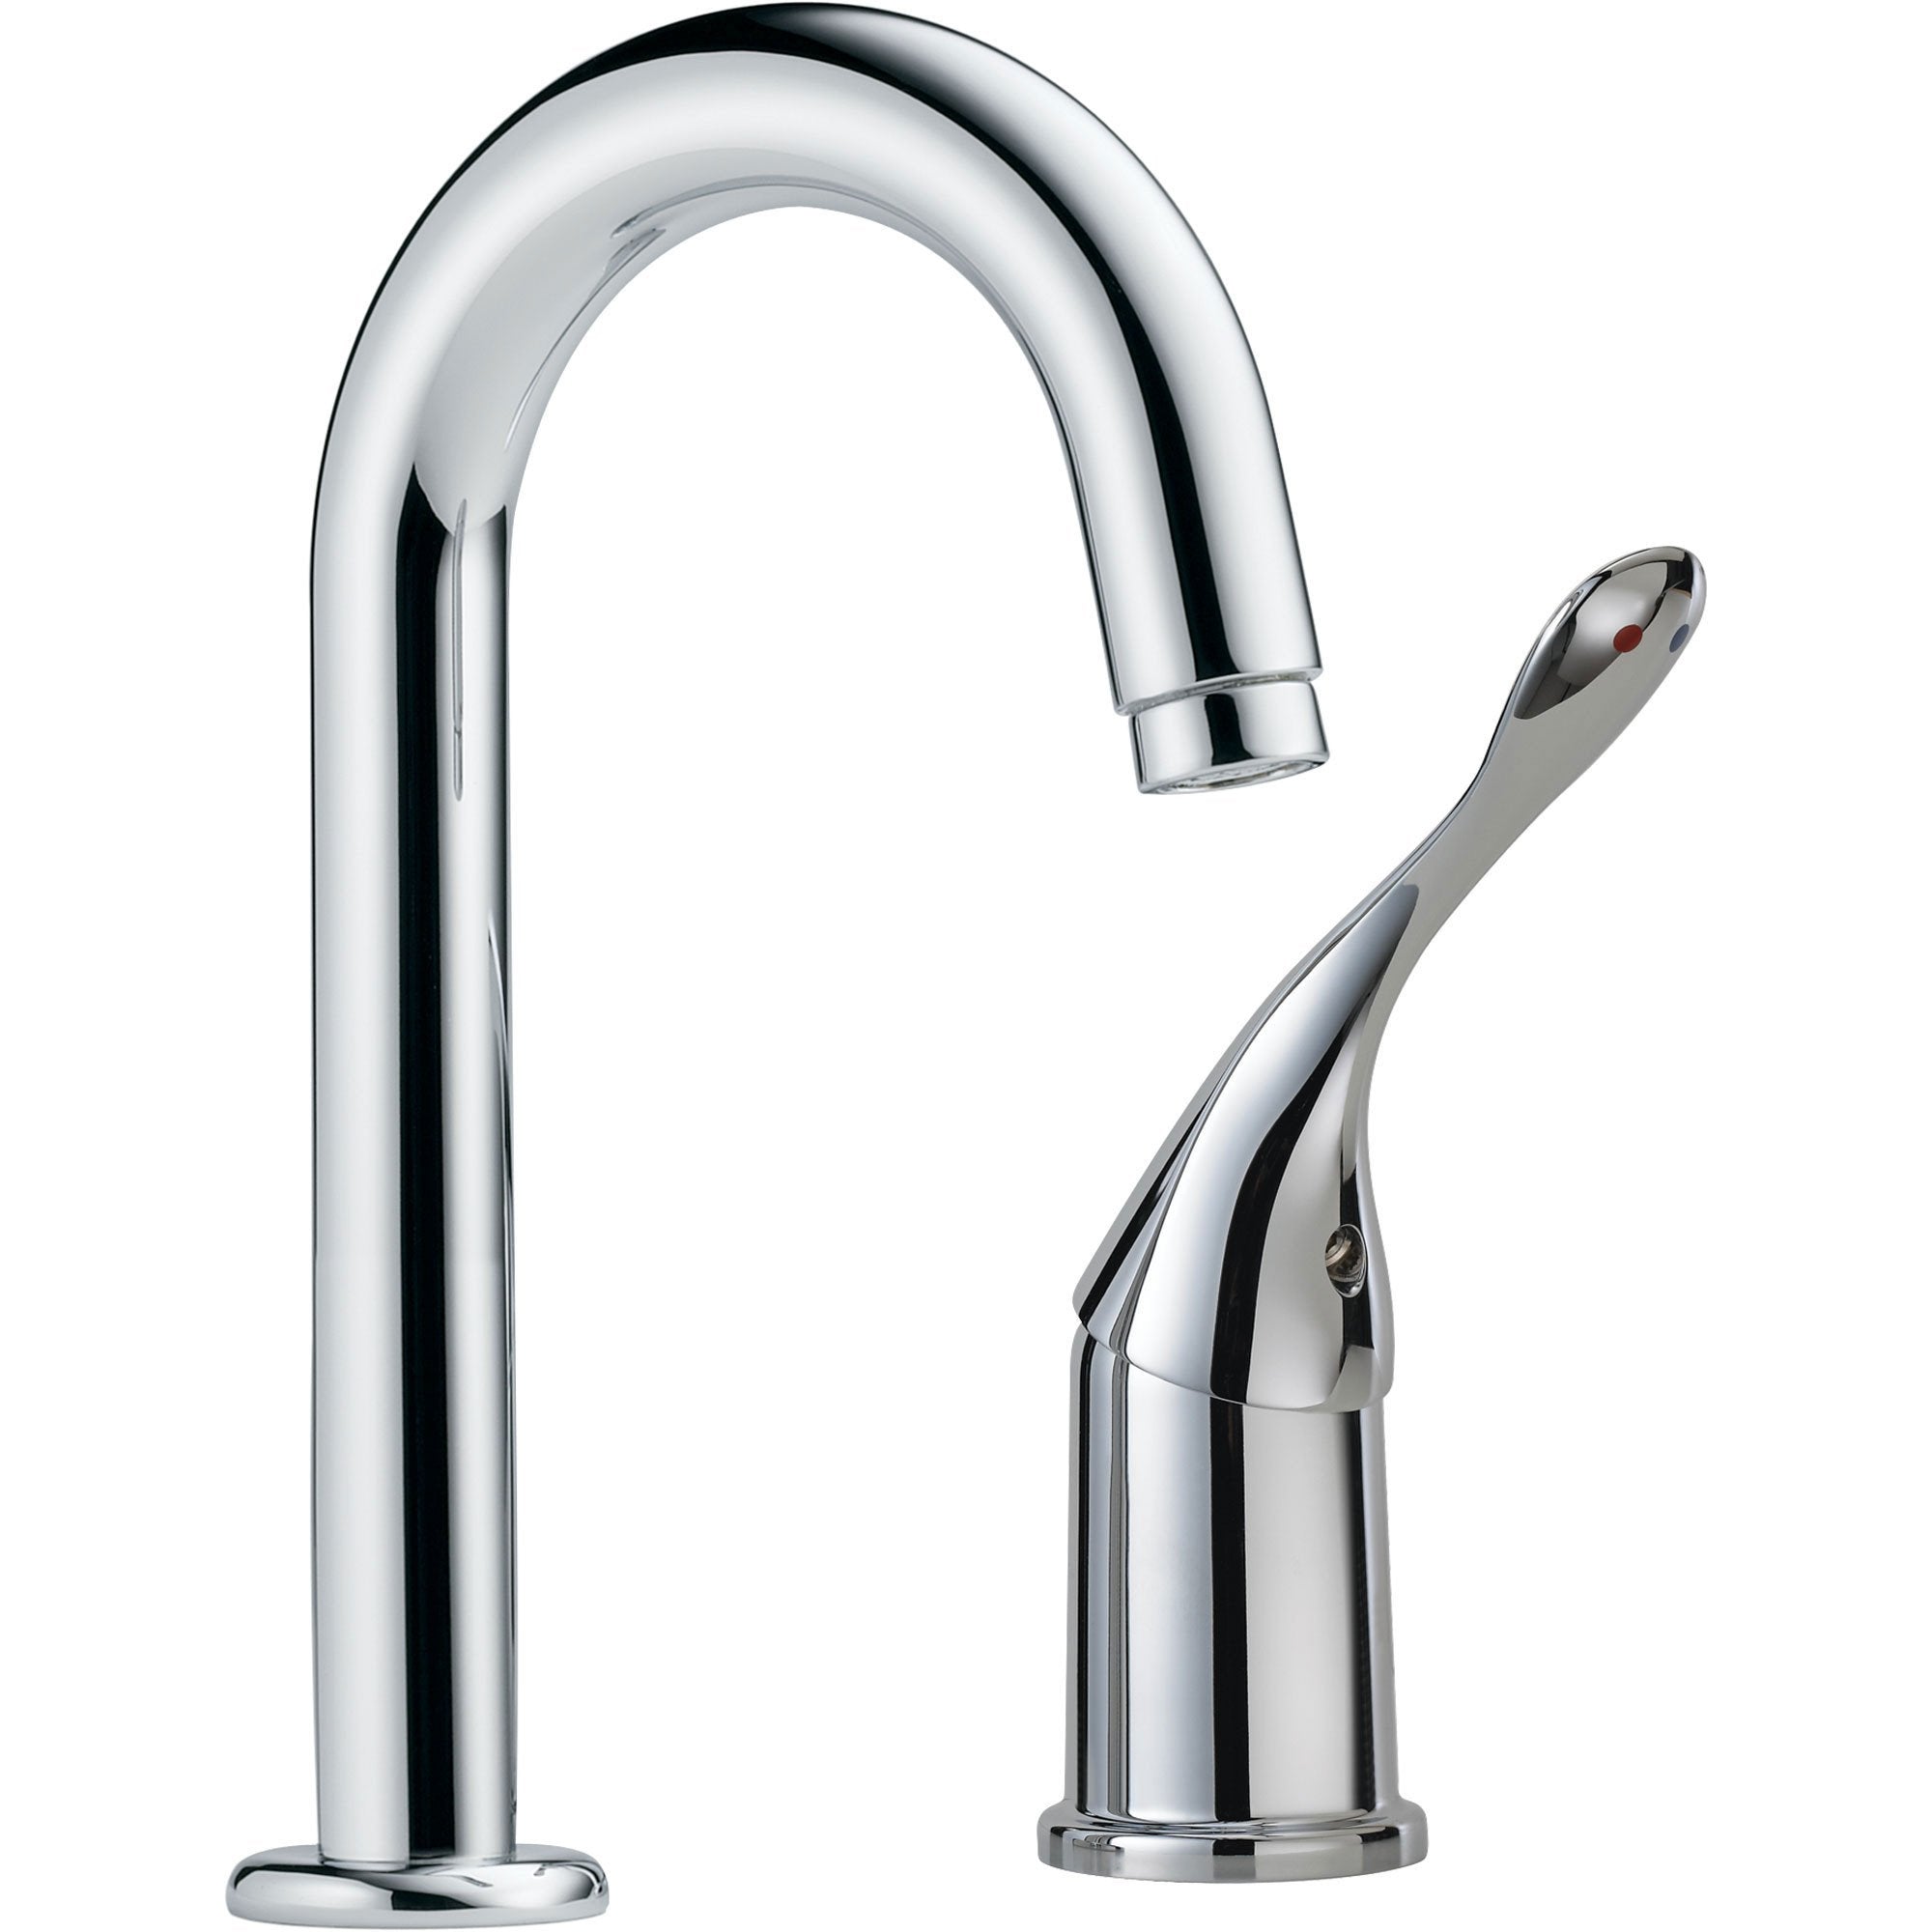 Delta Commercial Single Handle Bar Faucet in Chrome 608650